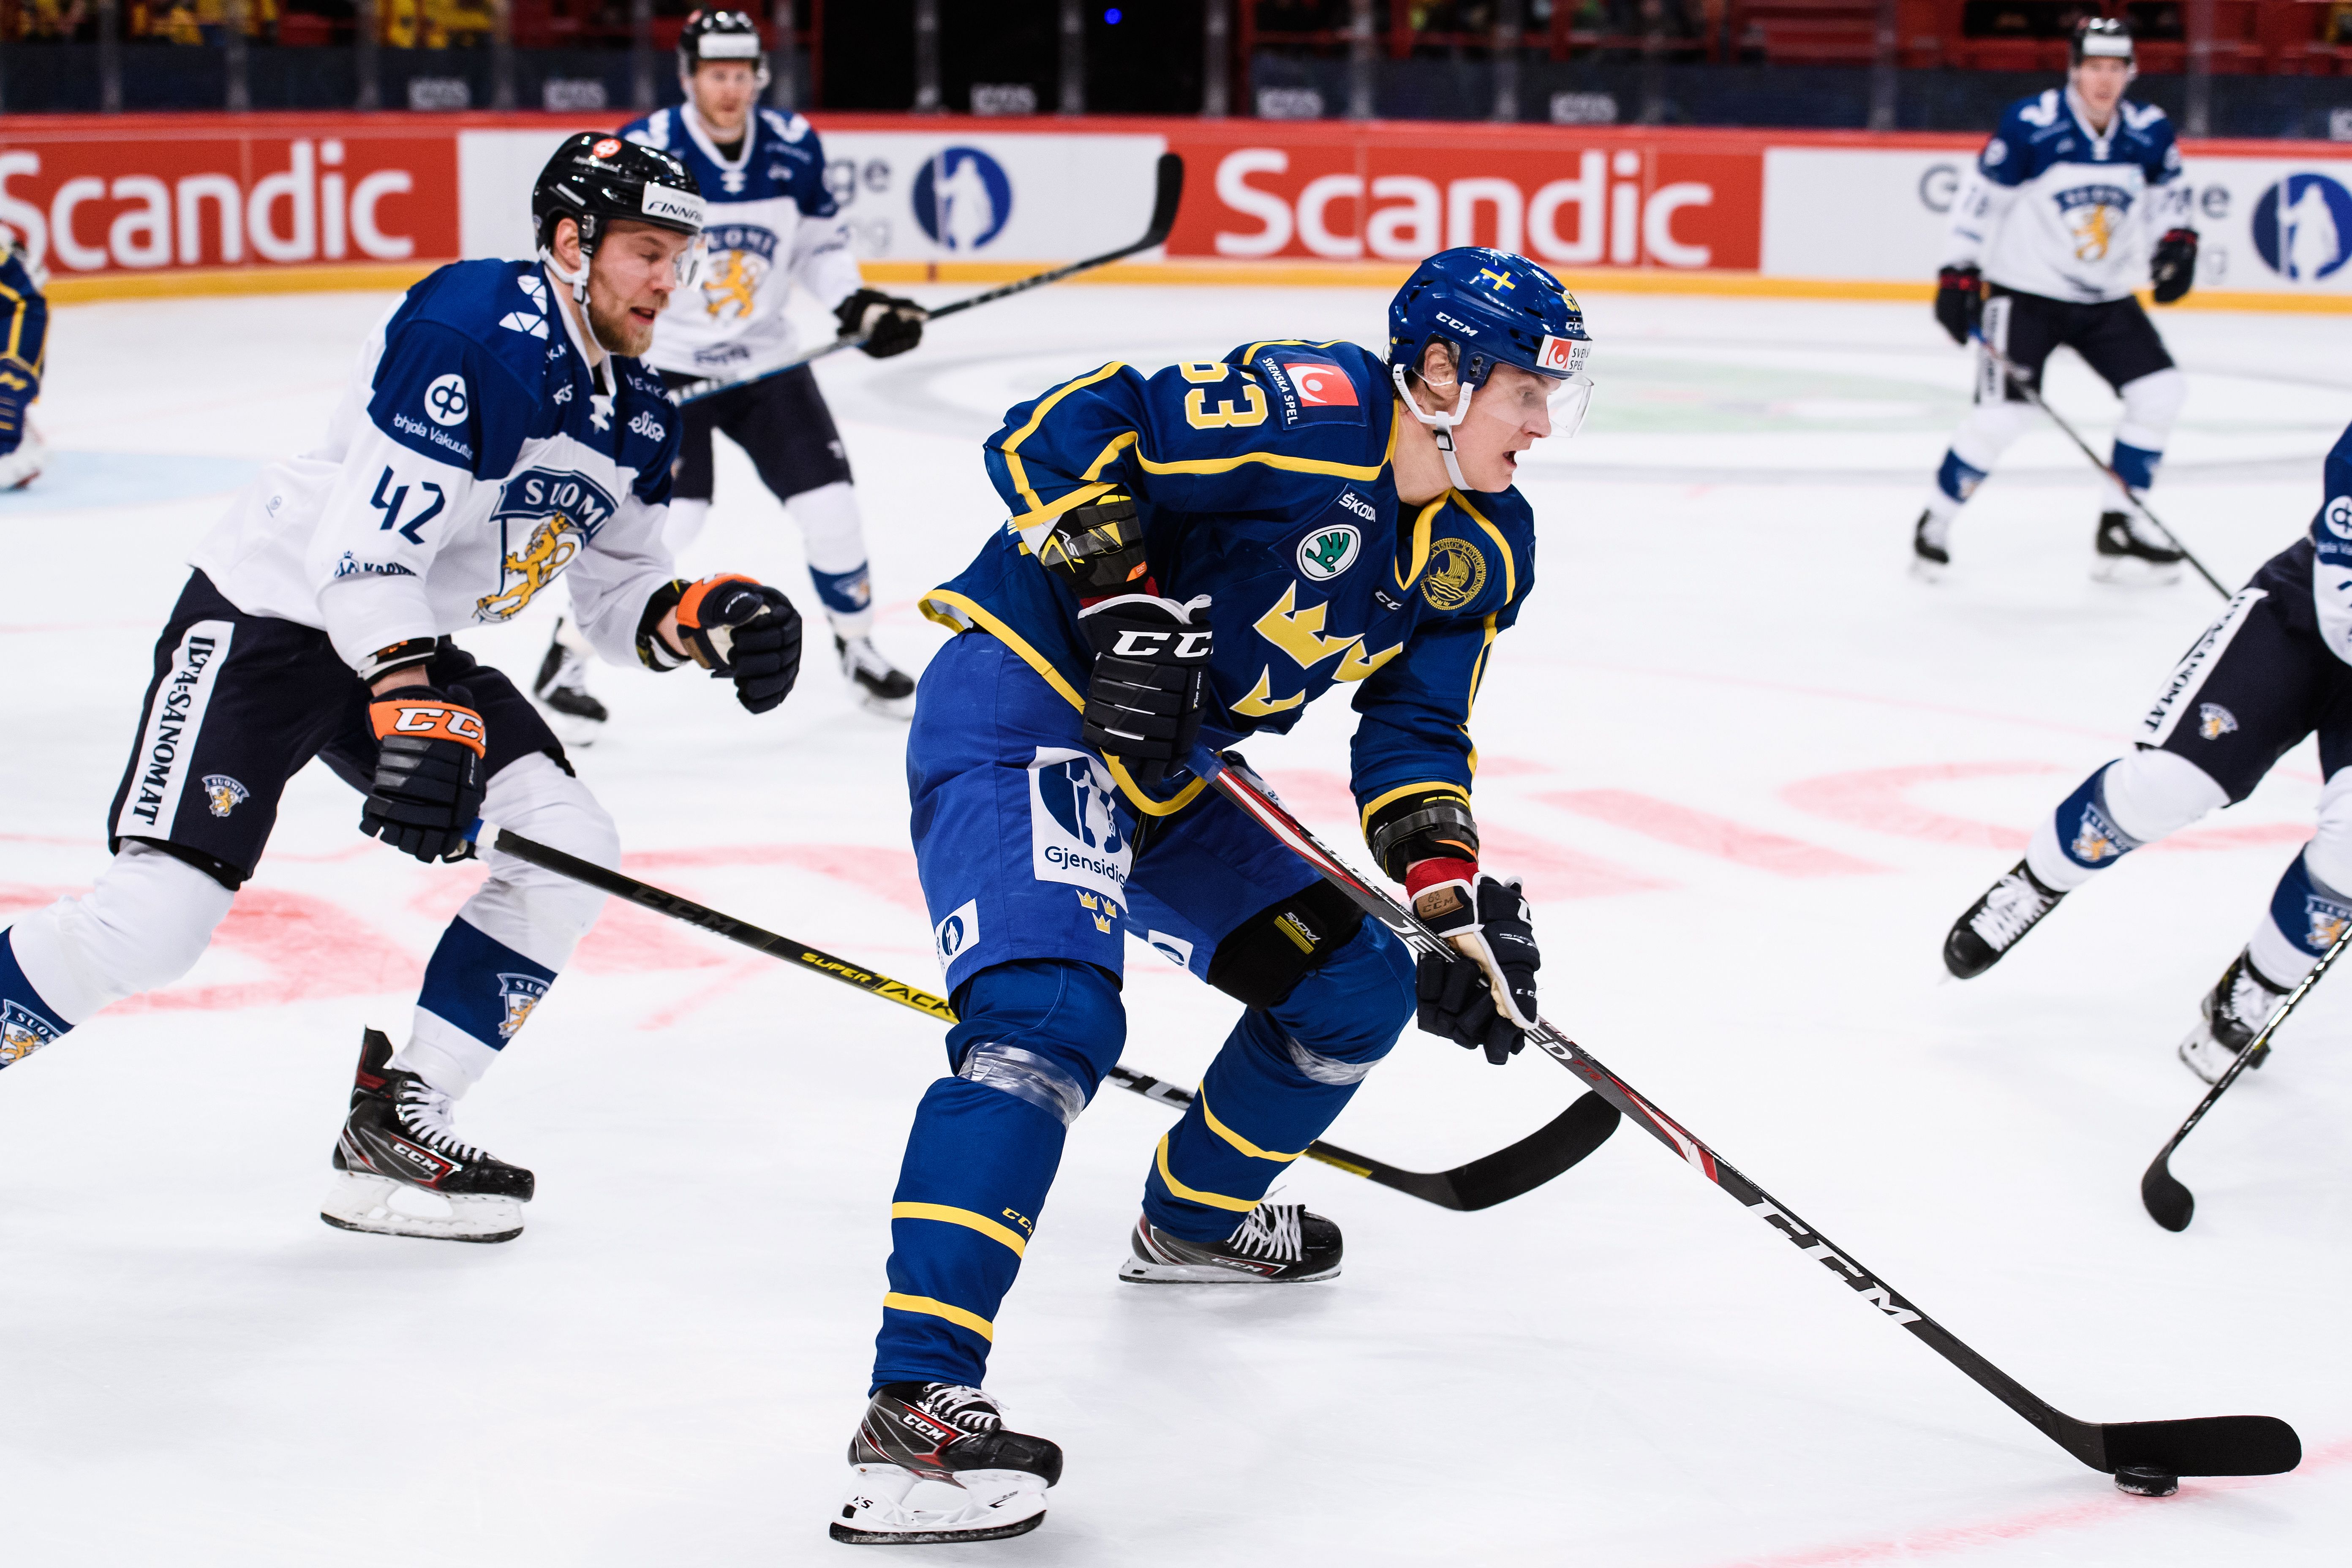 Sweden's Fredrik Handemark vies with Finland's Ilari Melart (L) during Beijer Hockey Games between Sweden and Finland at the Ericson Globe Arena in Stockholm, Sweden, on February 09, 2020.